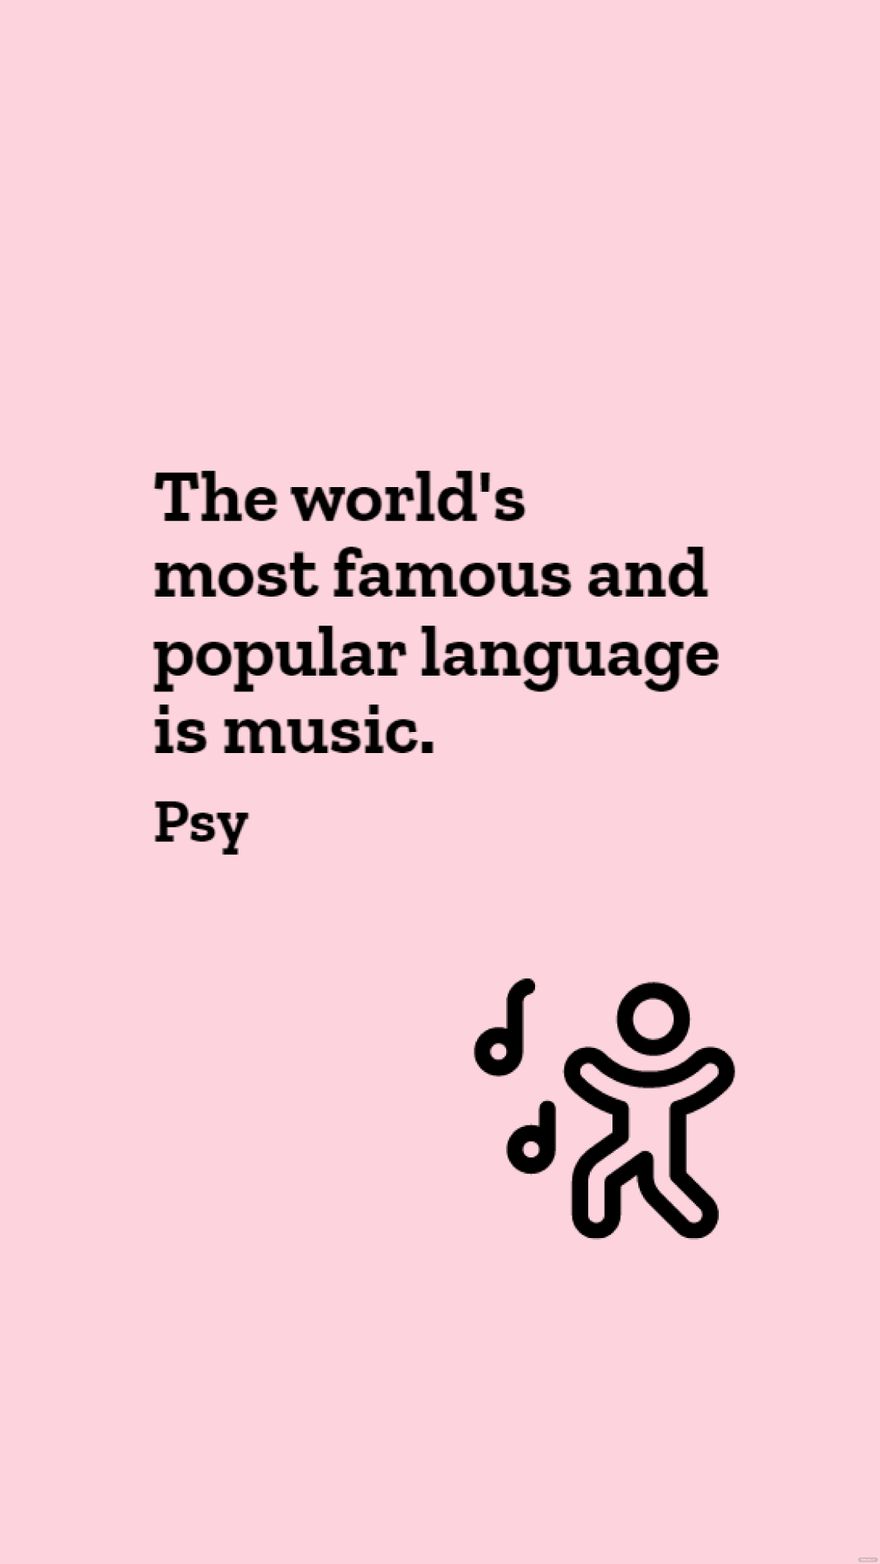 Psy - The world's most famous and popular language is music.